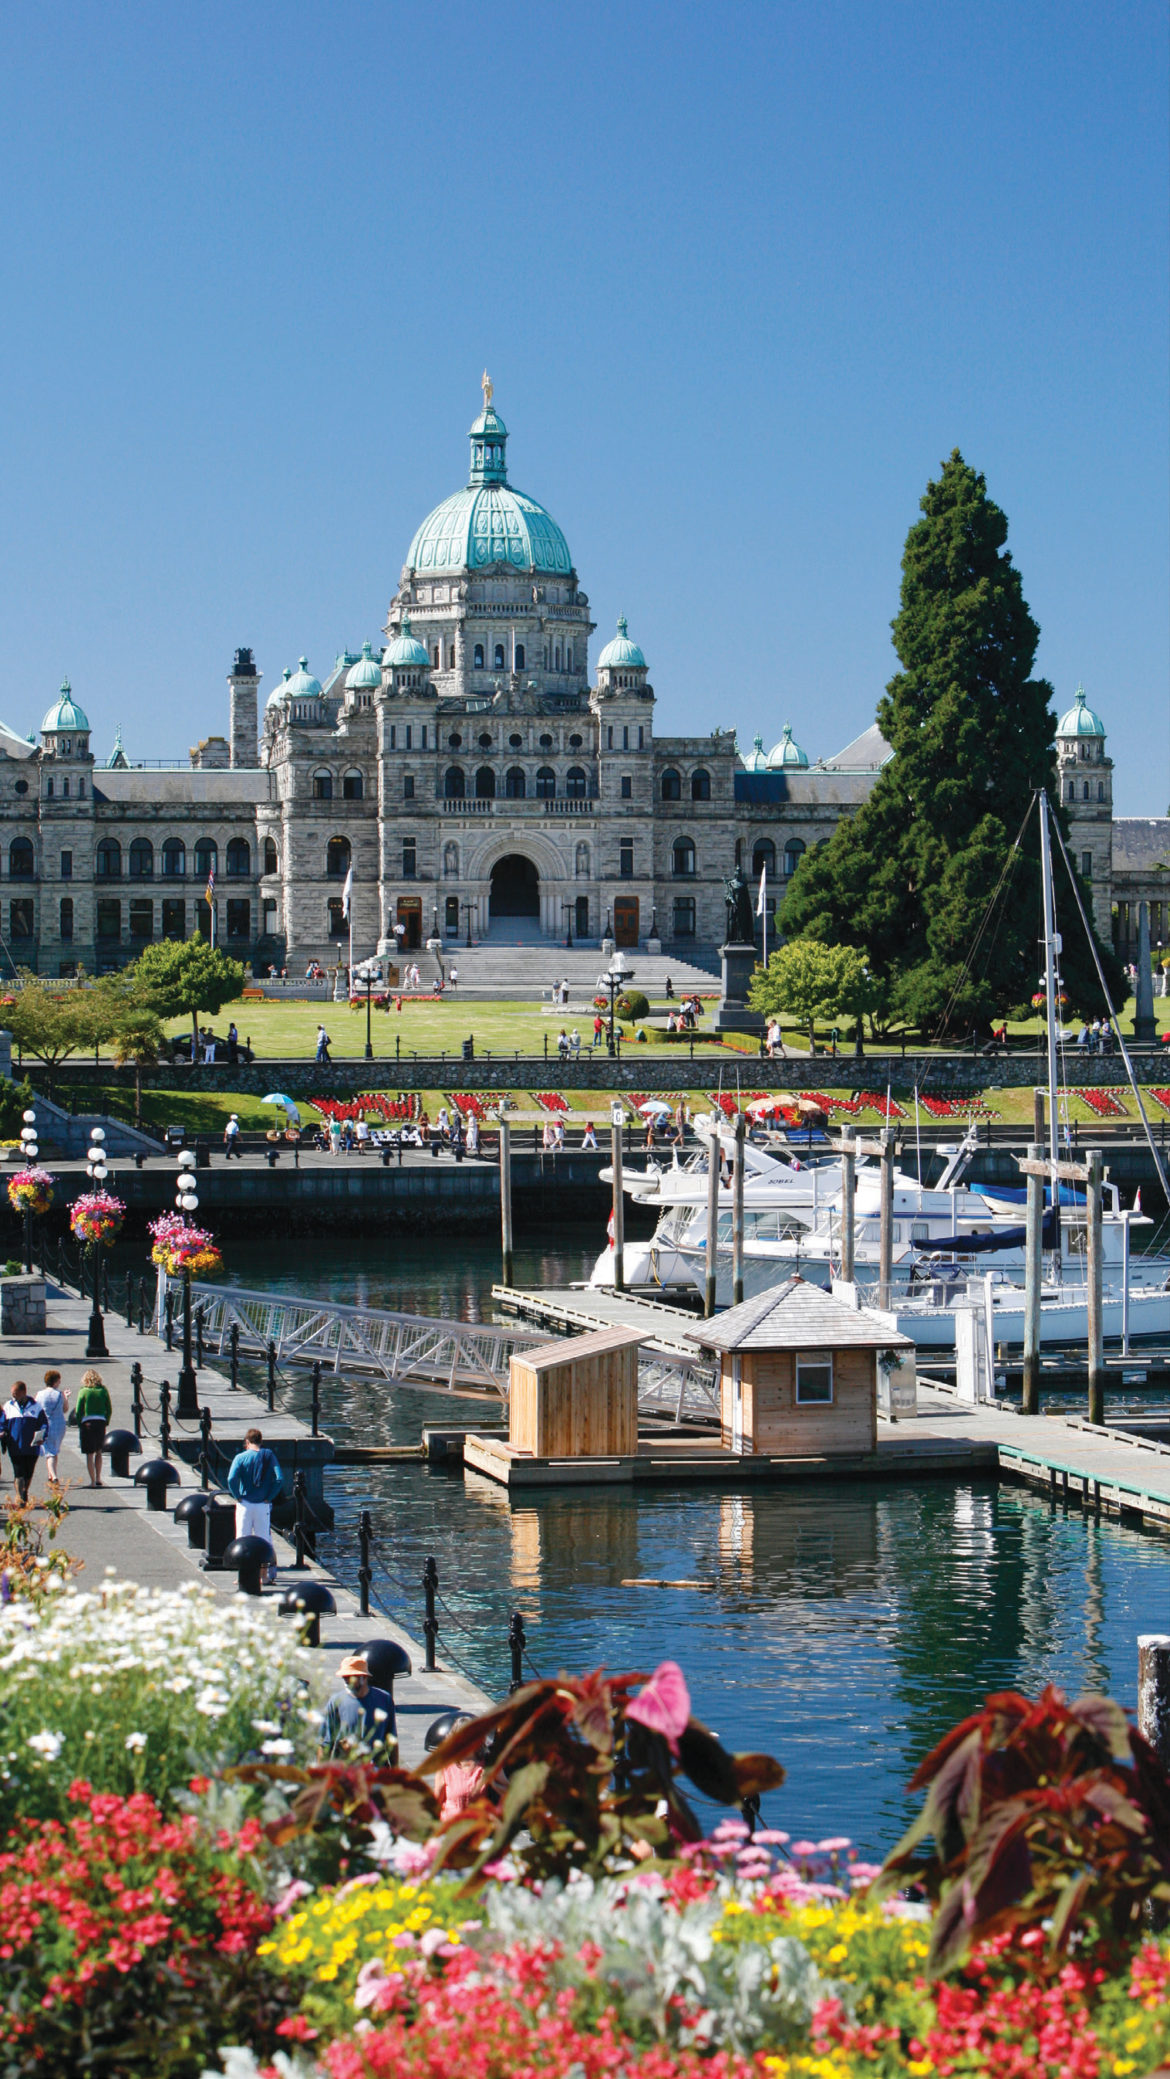 Free tours are offered daily at the Parliament Buildings overlooking Victoria, BC’s Inner Harbour.